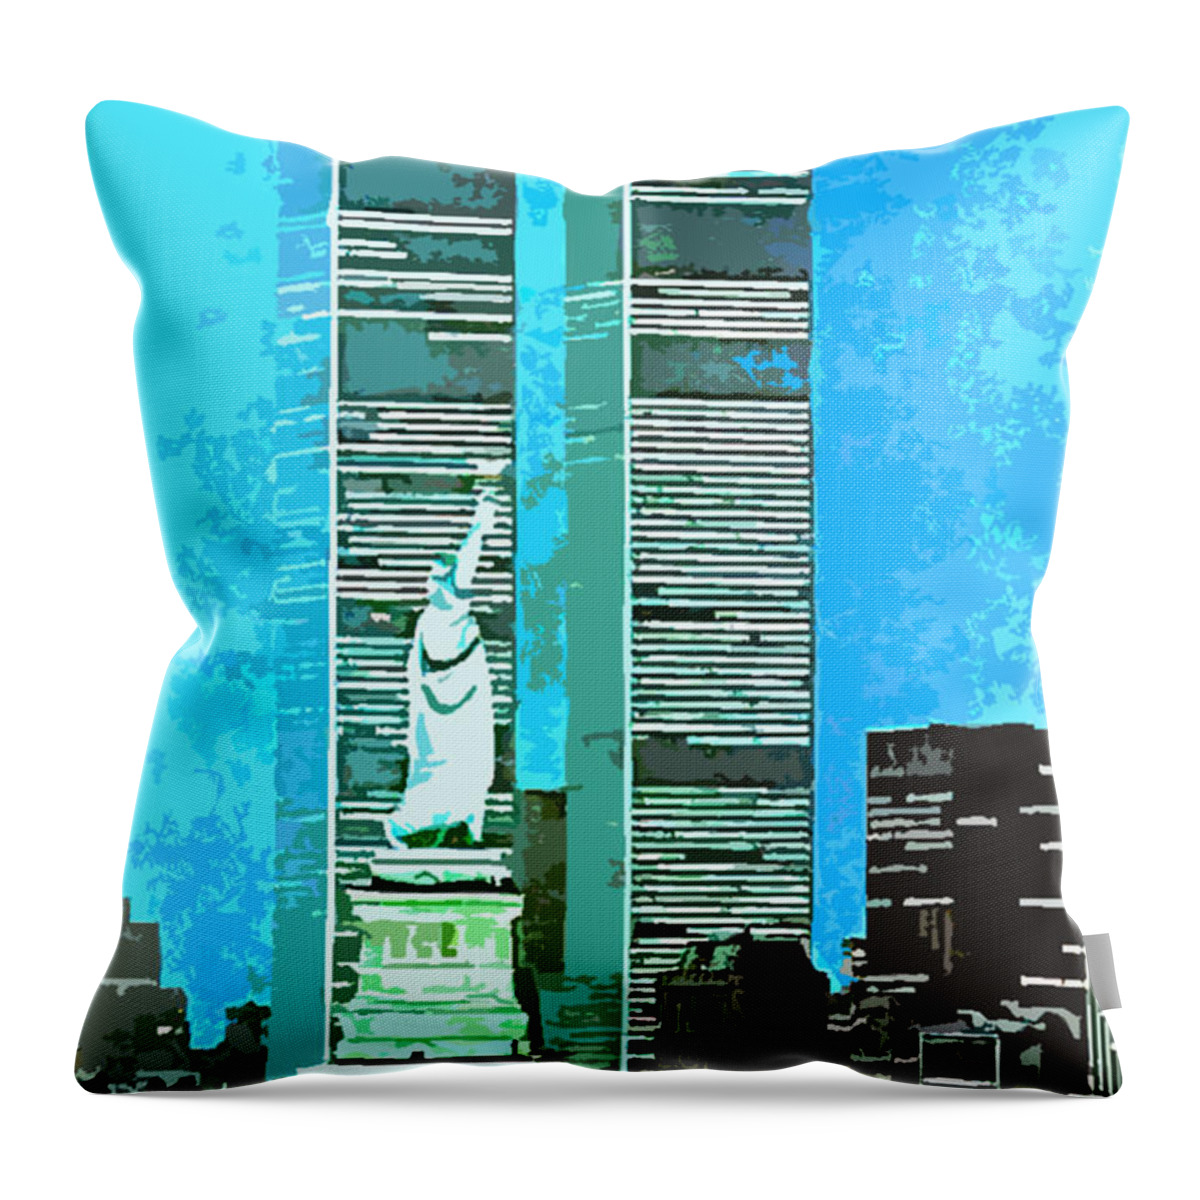 Twins Throw Pillow featuring the digital art Twins by Long Shot